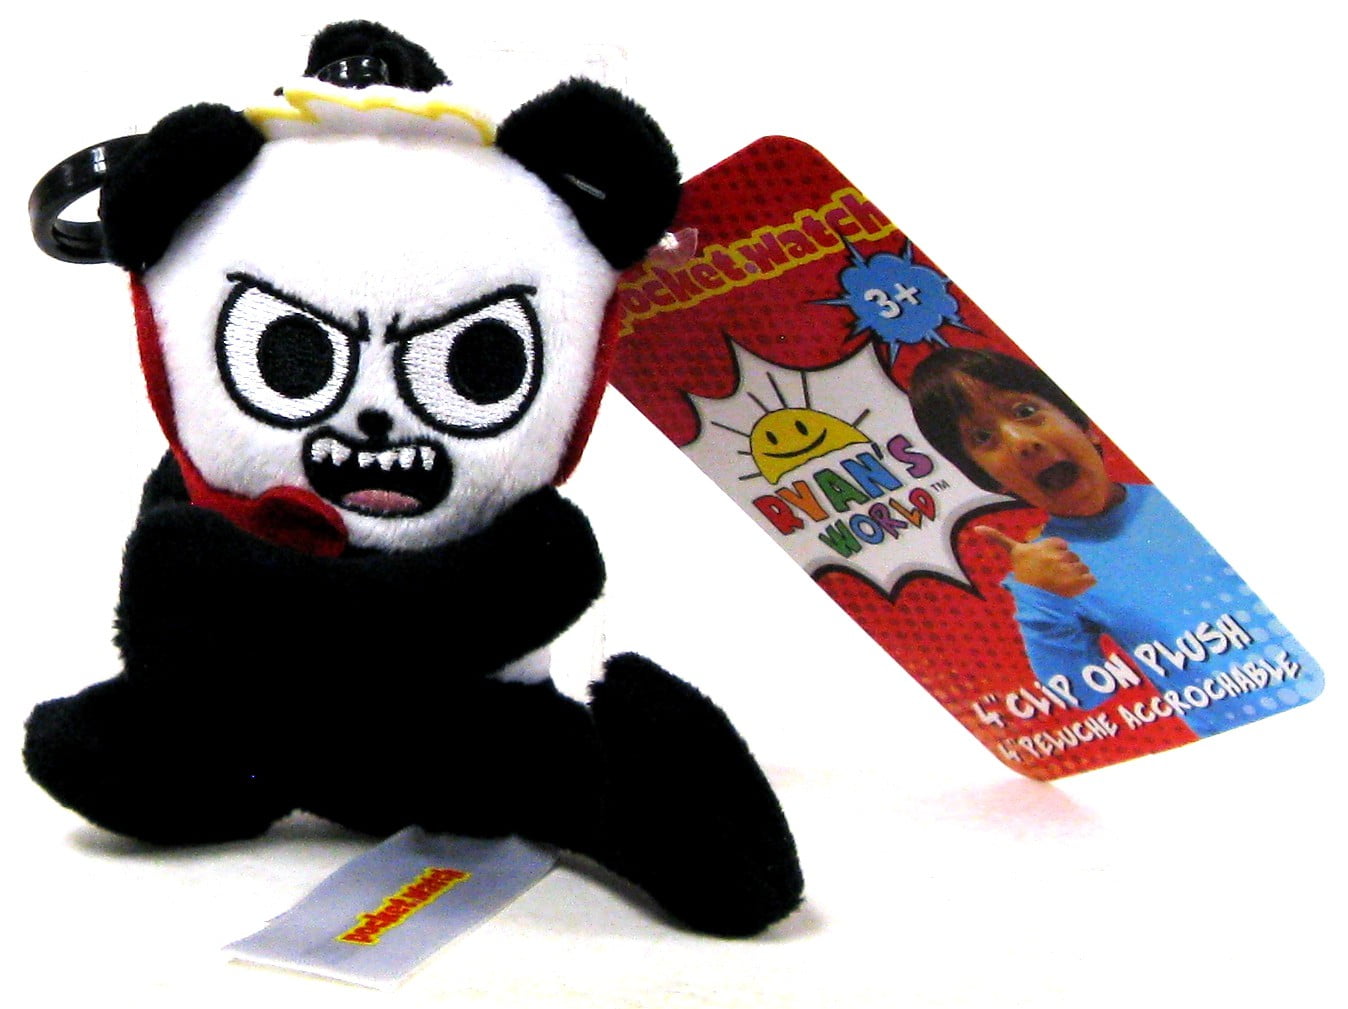 Ryan's World Combo Panda Feature Plush Moving Features Preowned for sale online